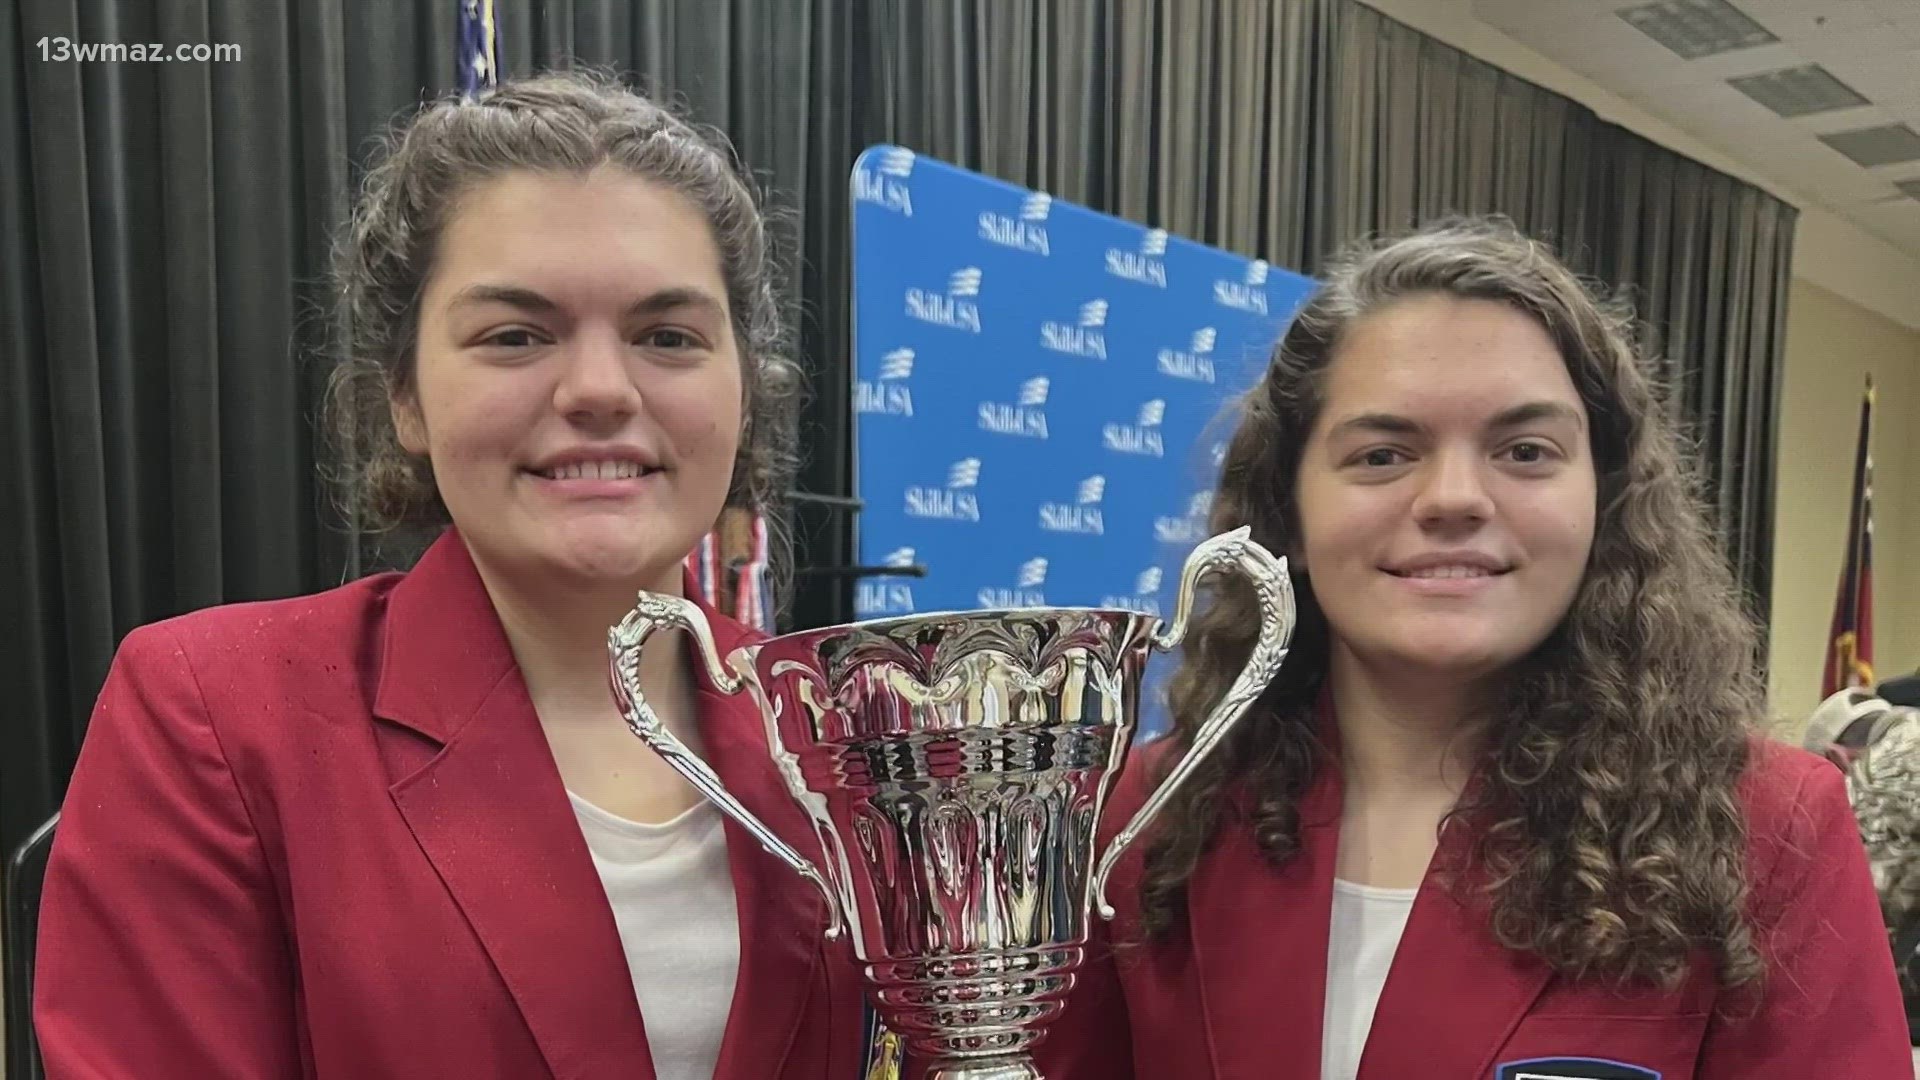 For many people, going through school can be an independent journey, but these twin sisters have stuck together as they graduate as valedictorian and salutatorian